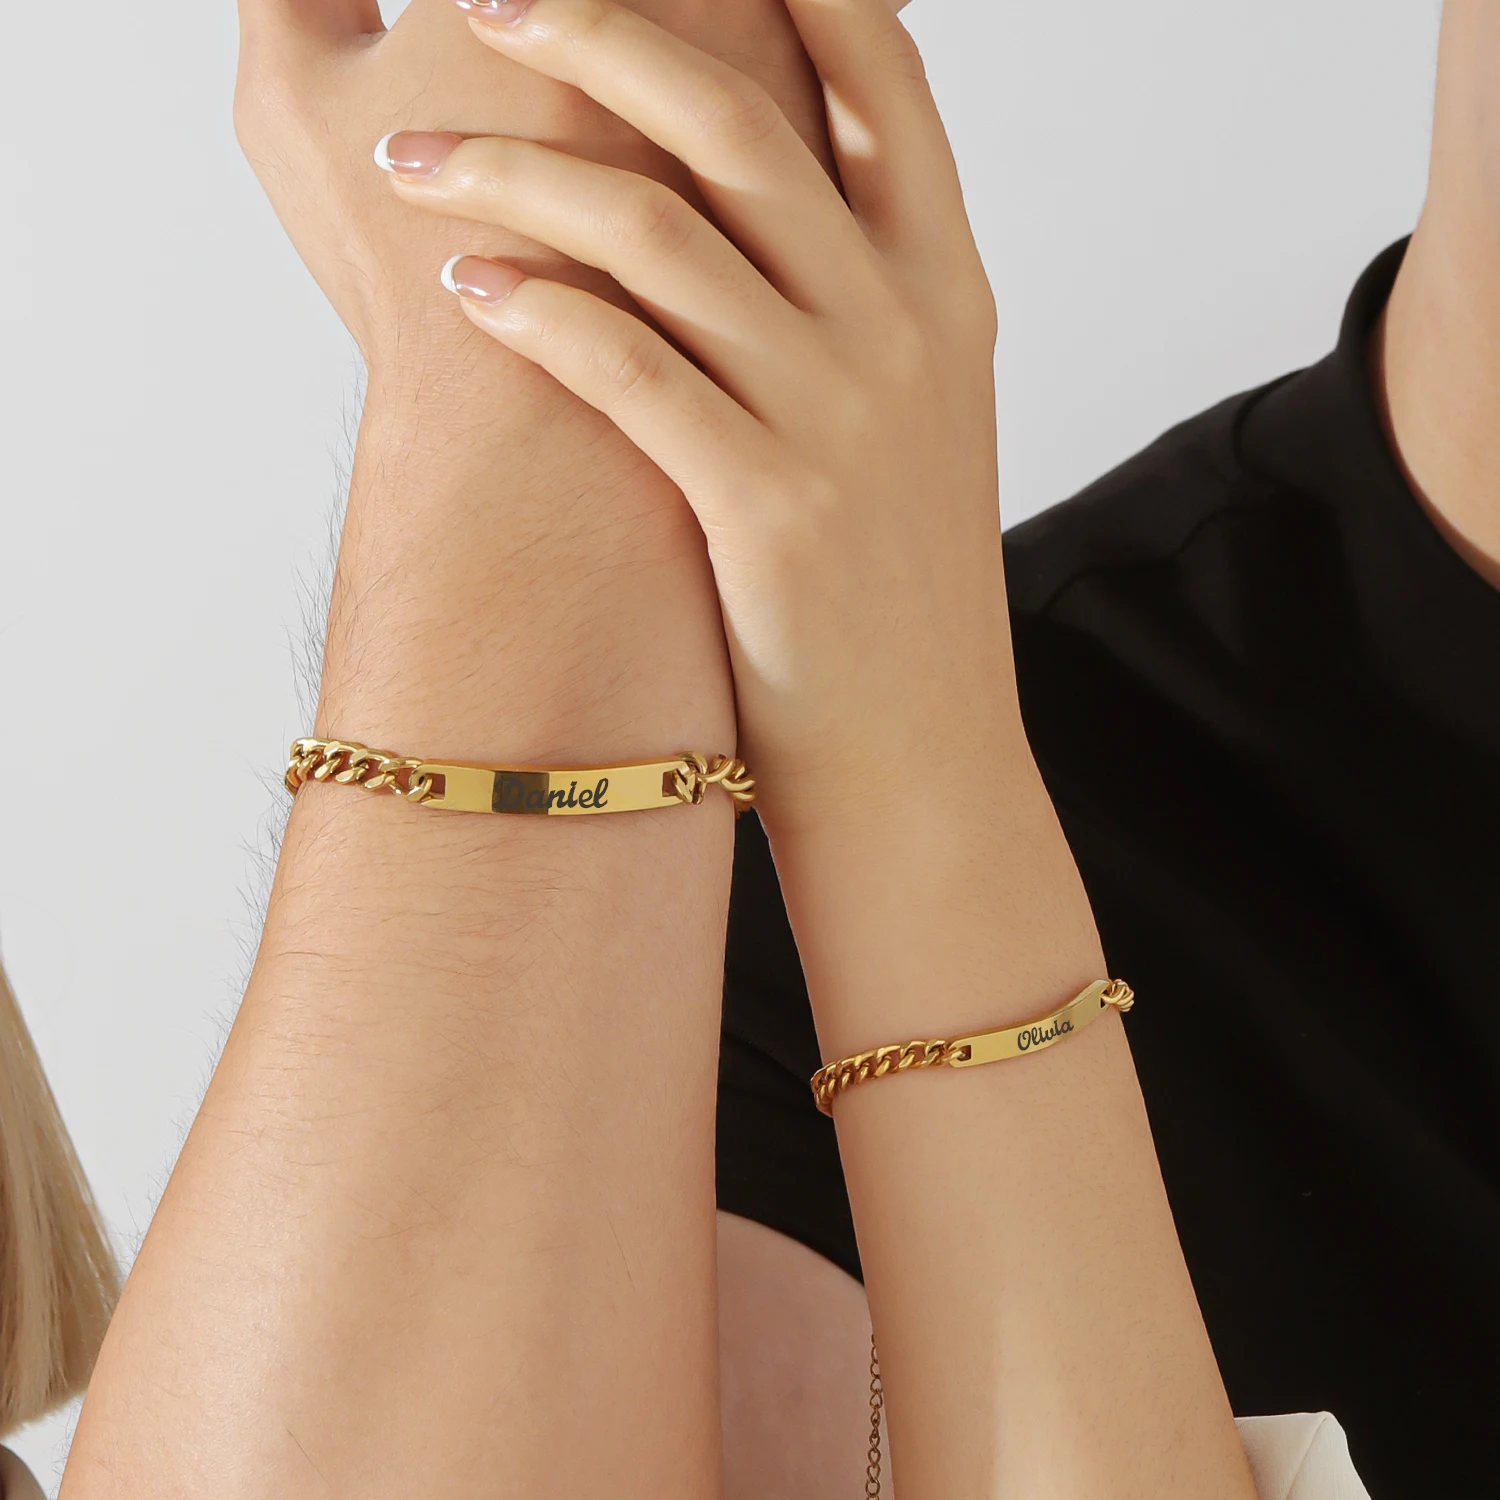 Matching Bracelets for Couples: A Symbol of Love and Connection